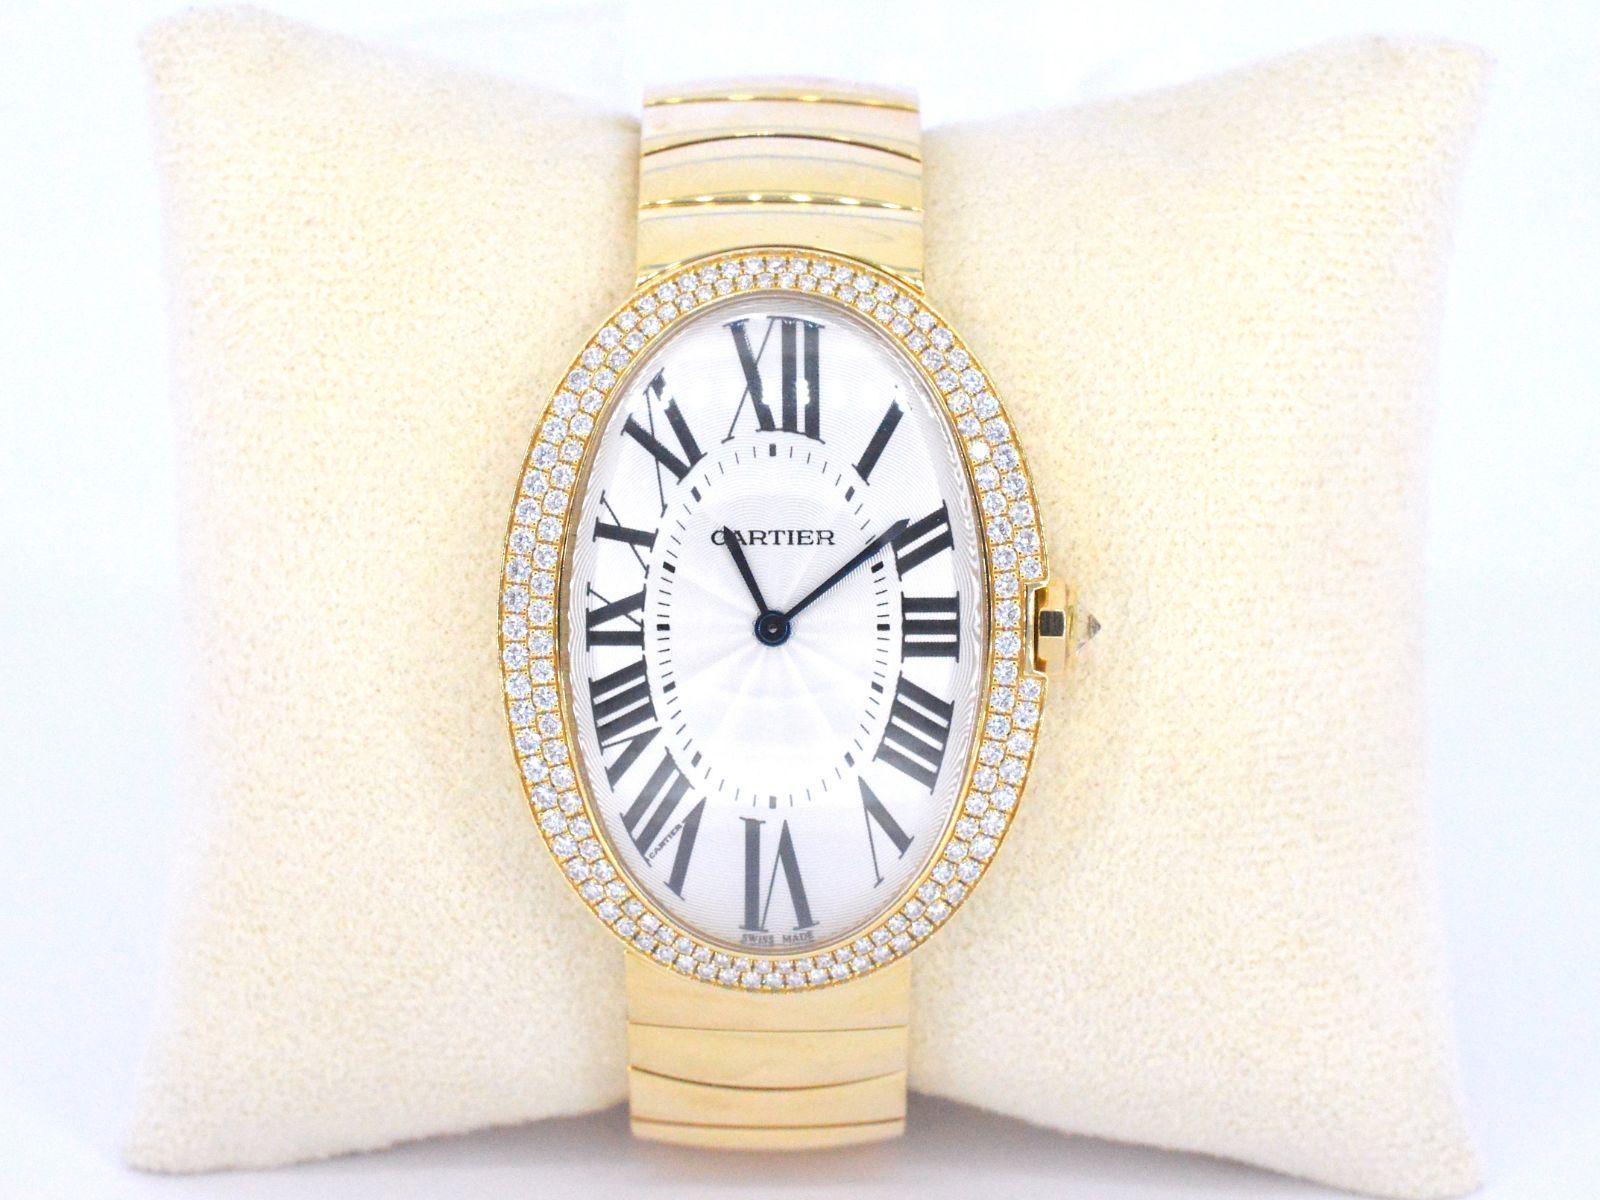 Cartier Baignoire Large 18k Gold Diamond Ladies Watch WB520003. Manual winding movement. 18k gold oval case 44 mm x 34 mm. Crown set with diamond. Original Cartier factory 149 diamond bezel. Scratch resistant sapphire crystal. Silver dial with black